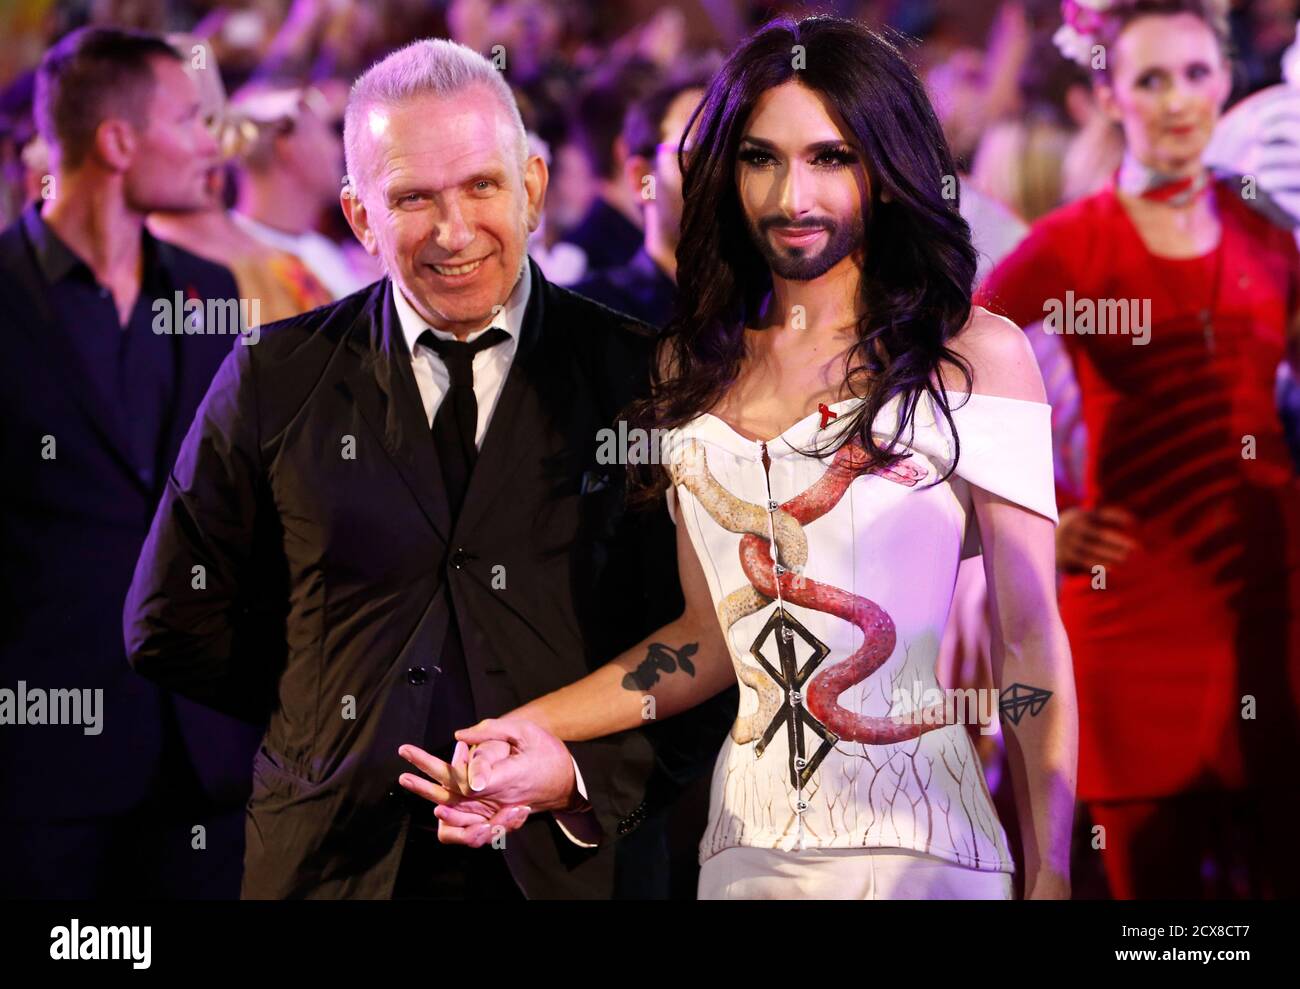 Designer Jean Paul Gaultier and Eurovision Song Contest winner Conchita  Wurst arrive for the opening ceremony of the 22nd Life Ball in Vienna May  31, 2014. Life Ball is Europe's largest annual